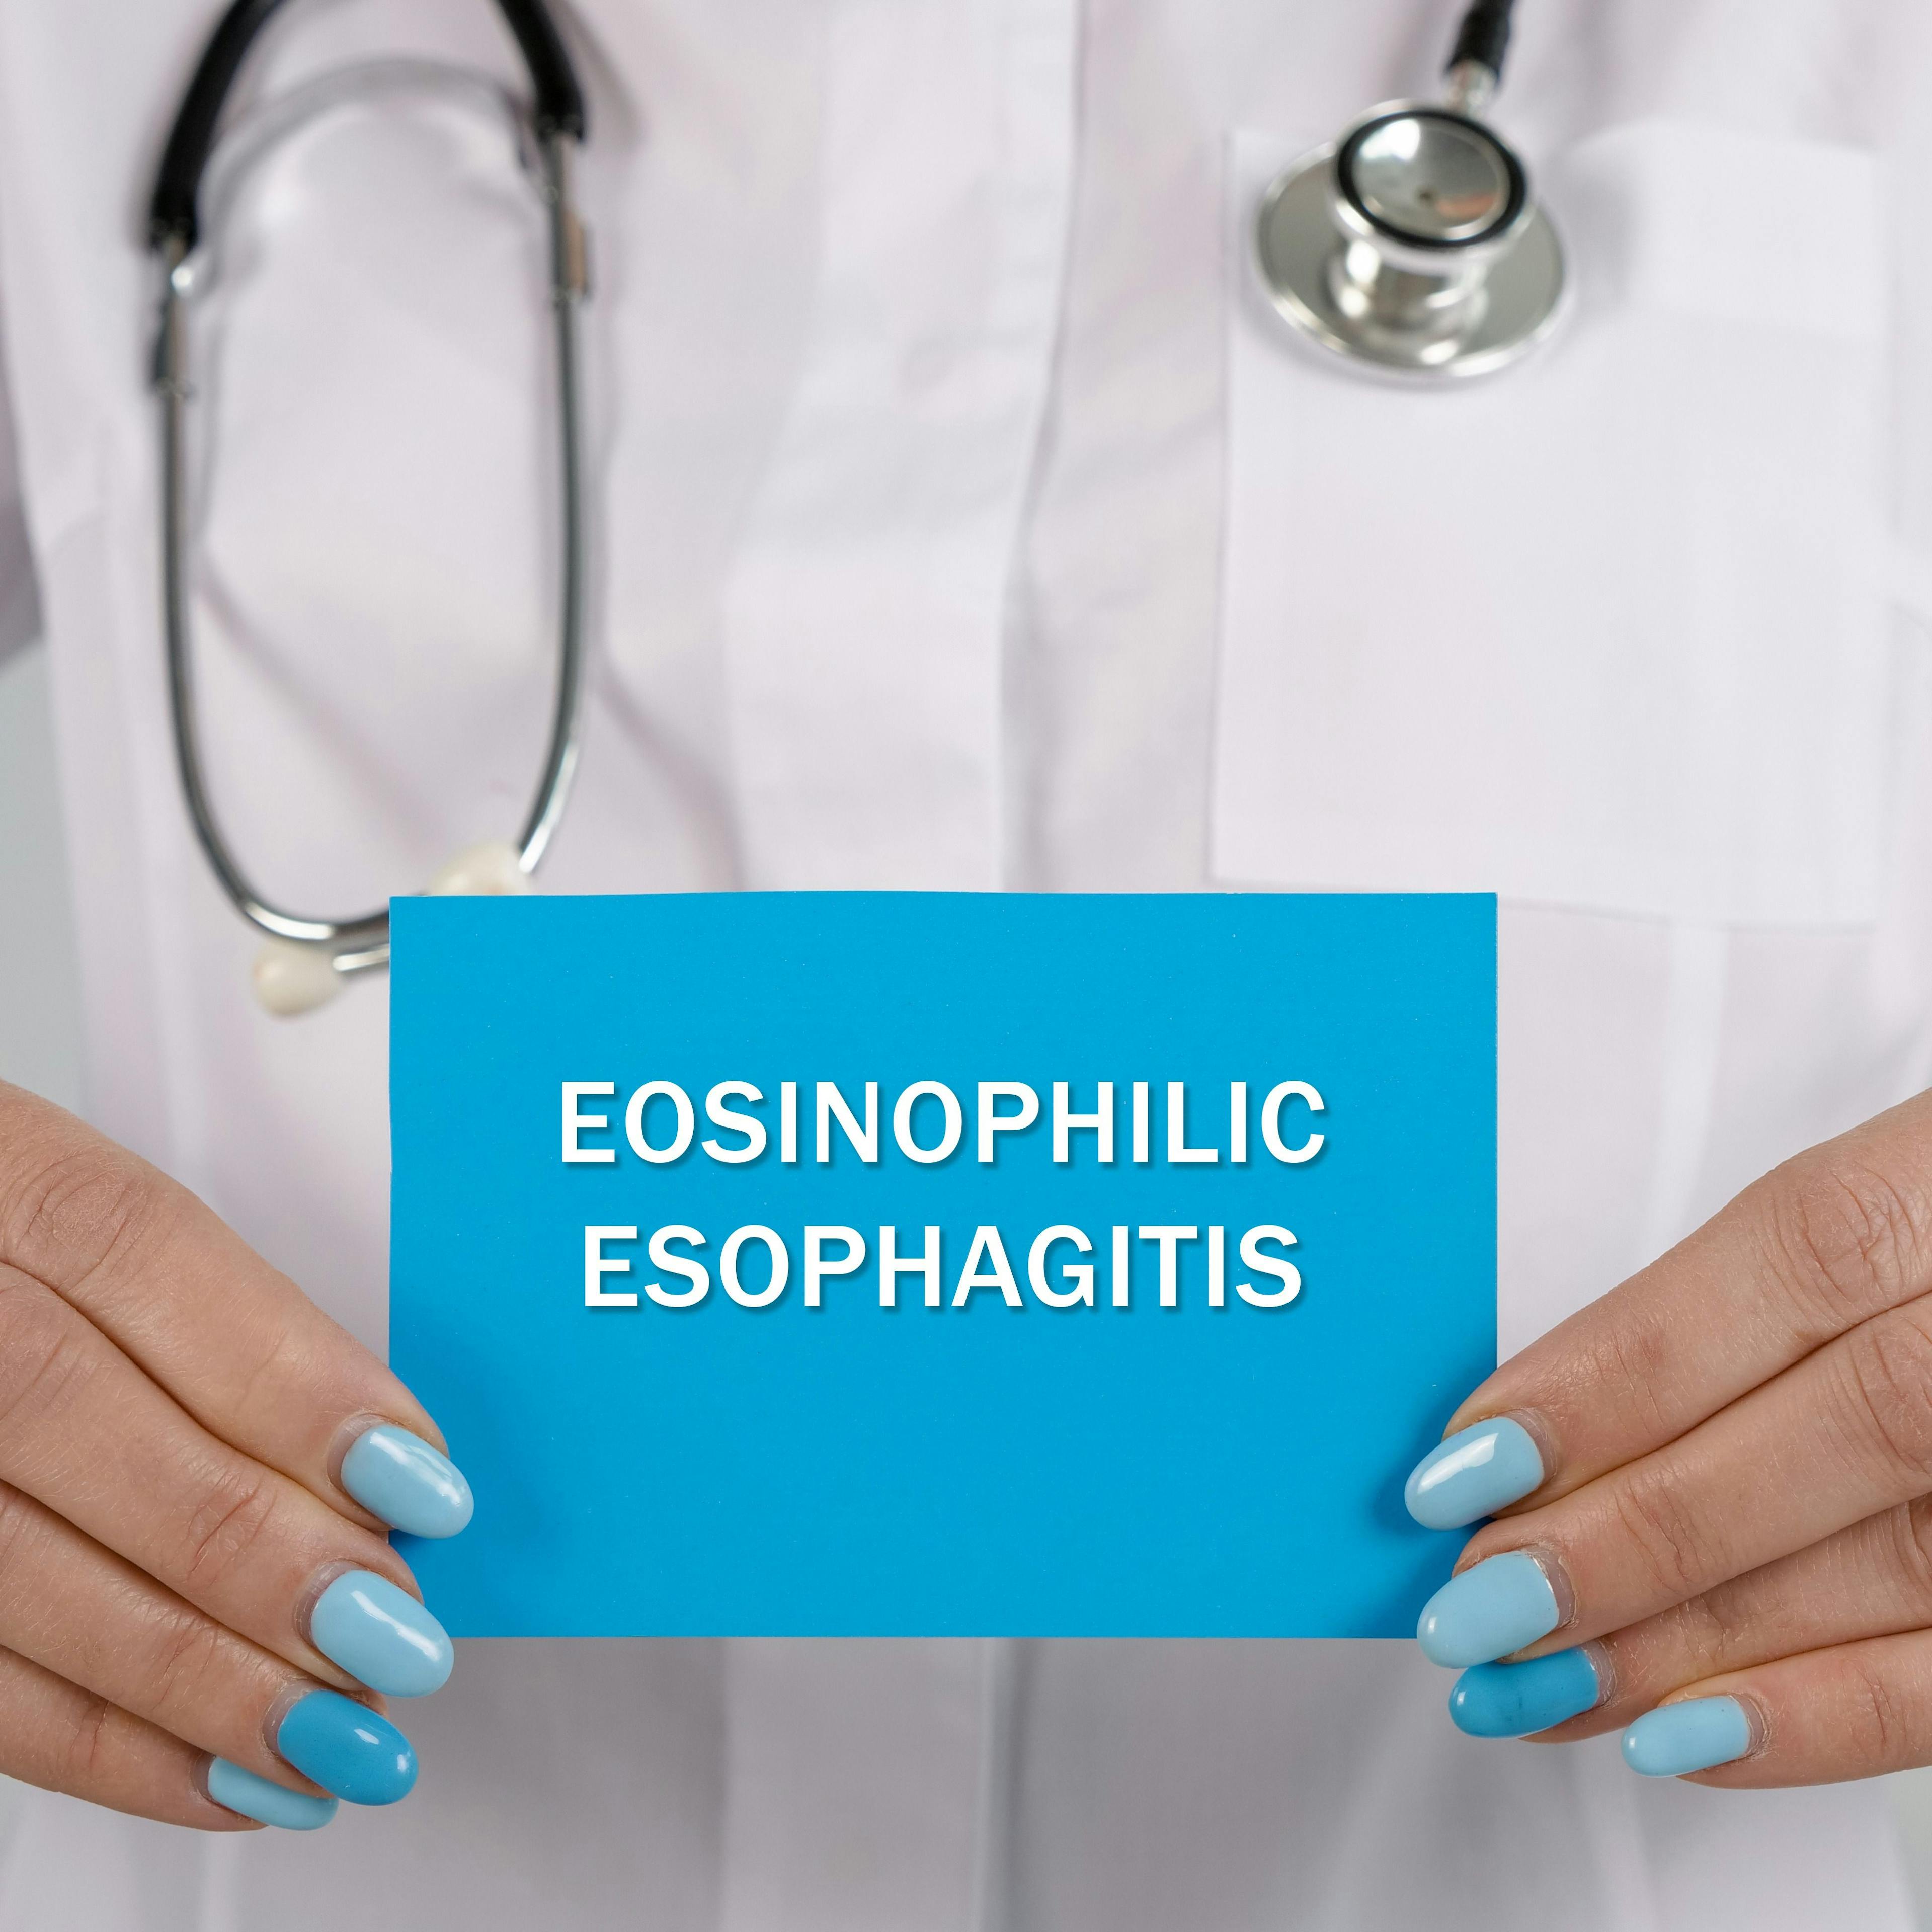 FDA Approved Dupilumab as the First Treatment for Eosinophilic Esophagitis